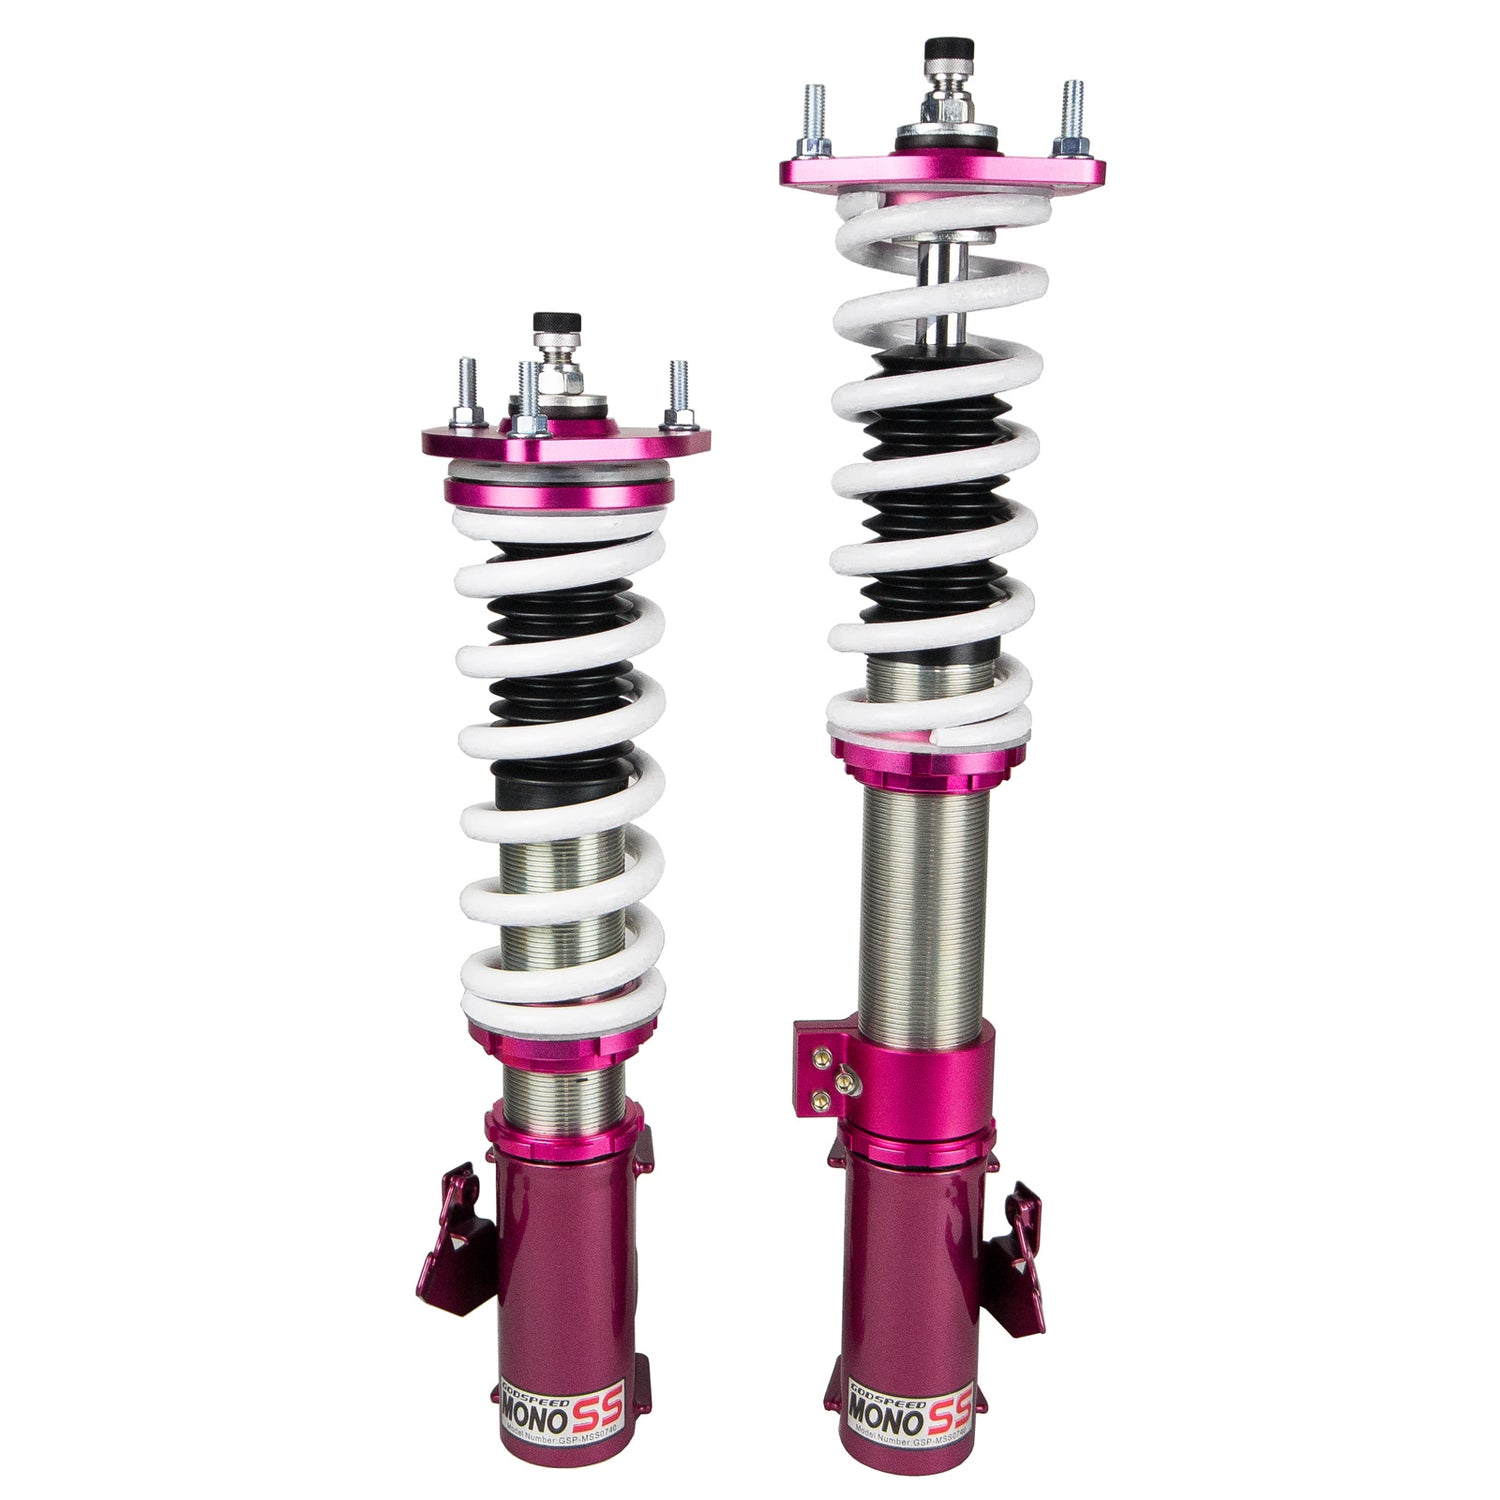 Godspeed MSS0740-A MonoSS Coilover Lowering Kit, Fully Adjustable, Ride Height, Spring Tension And 16 Click Damping, Nissan Sentra(B13/N14) 1991-94